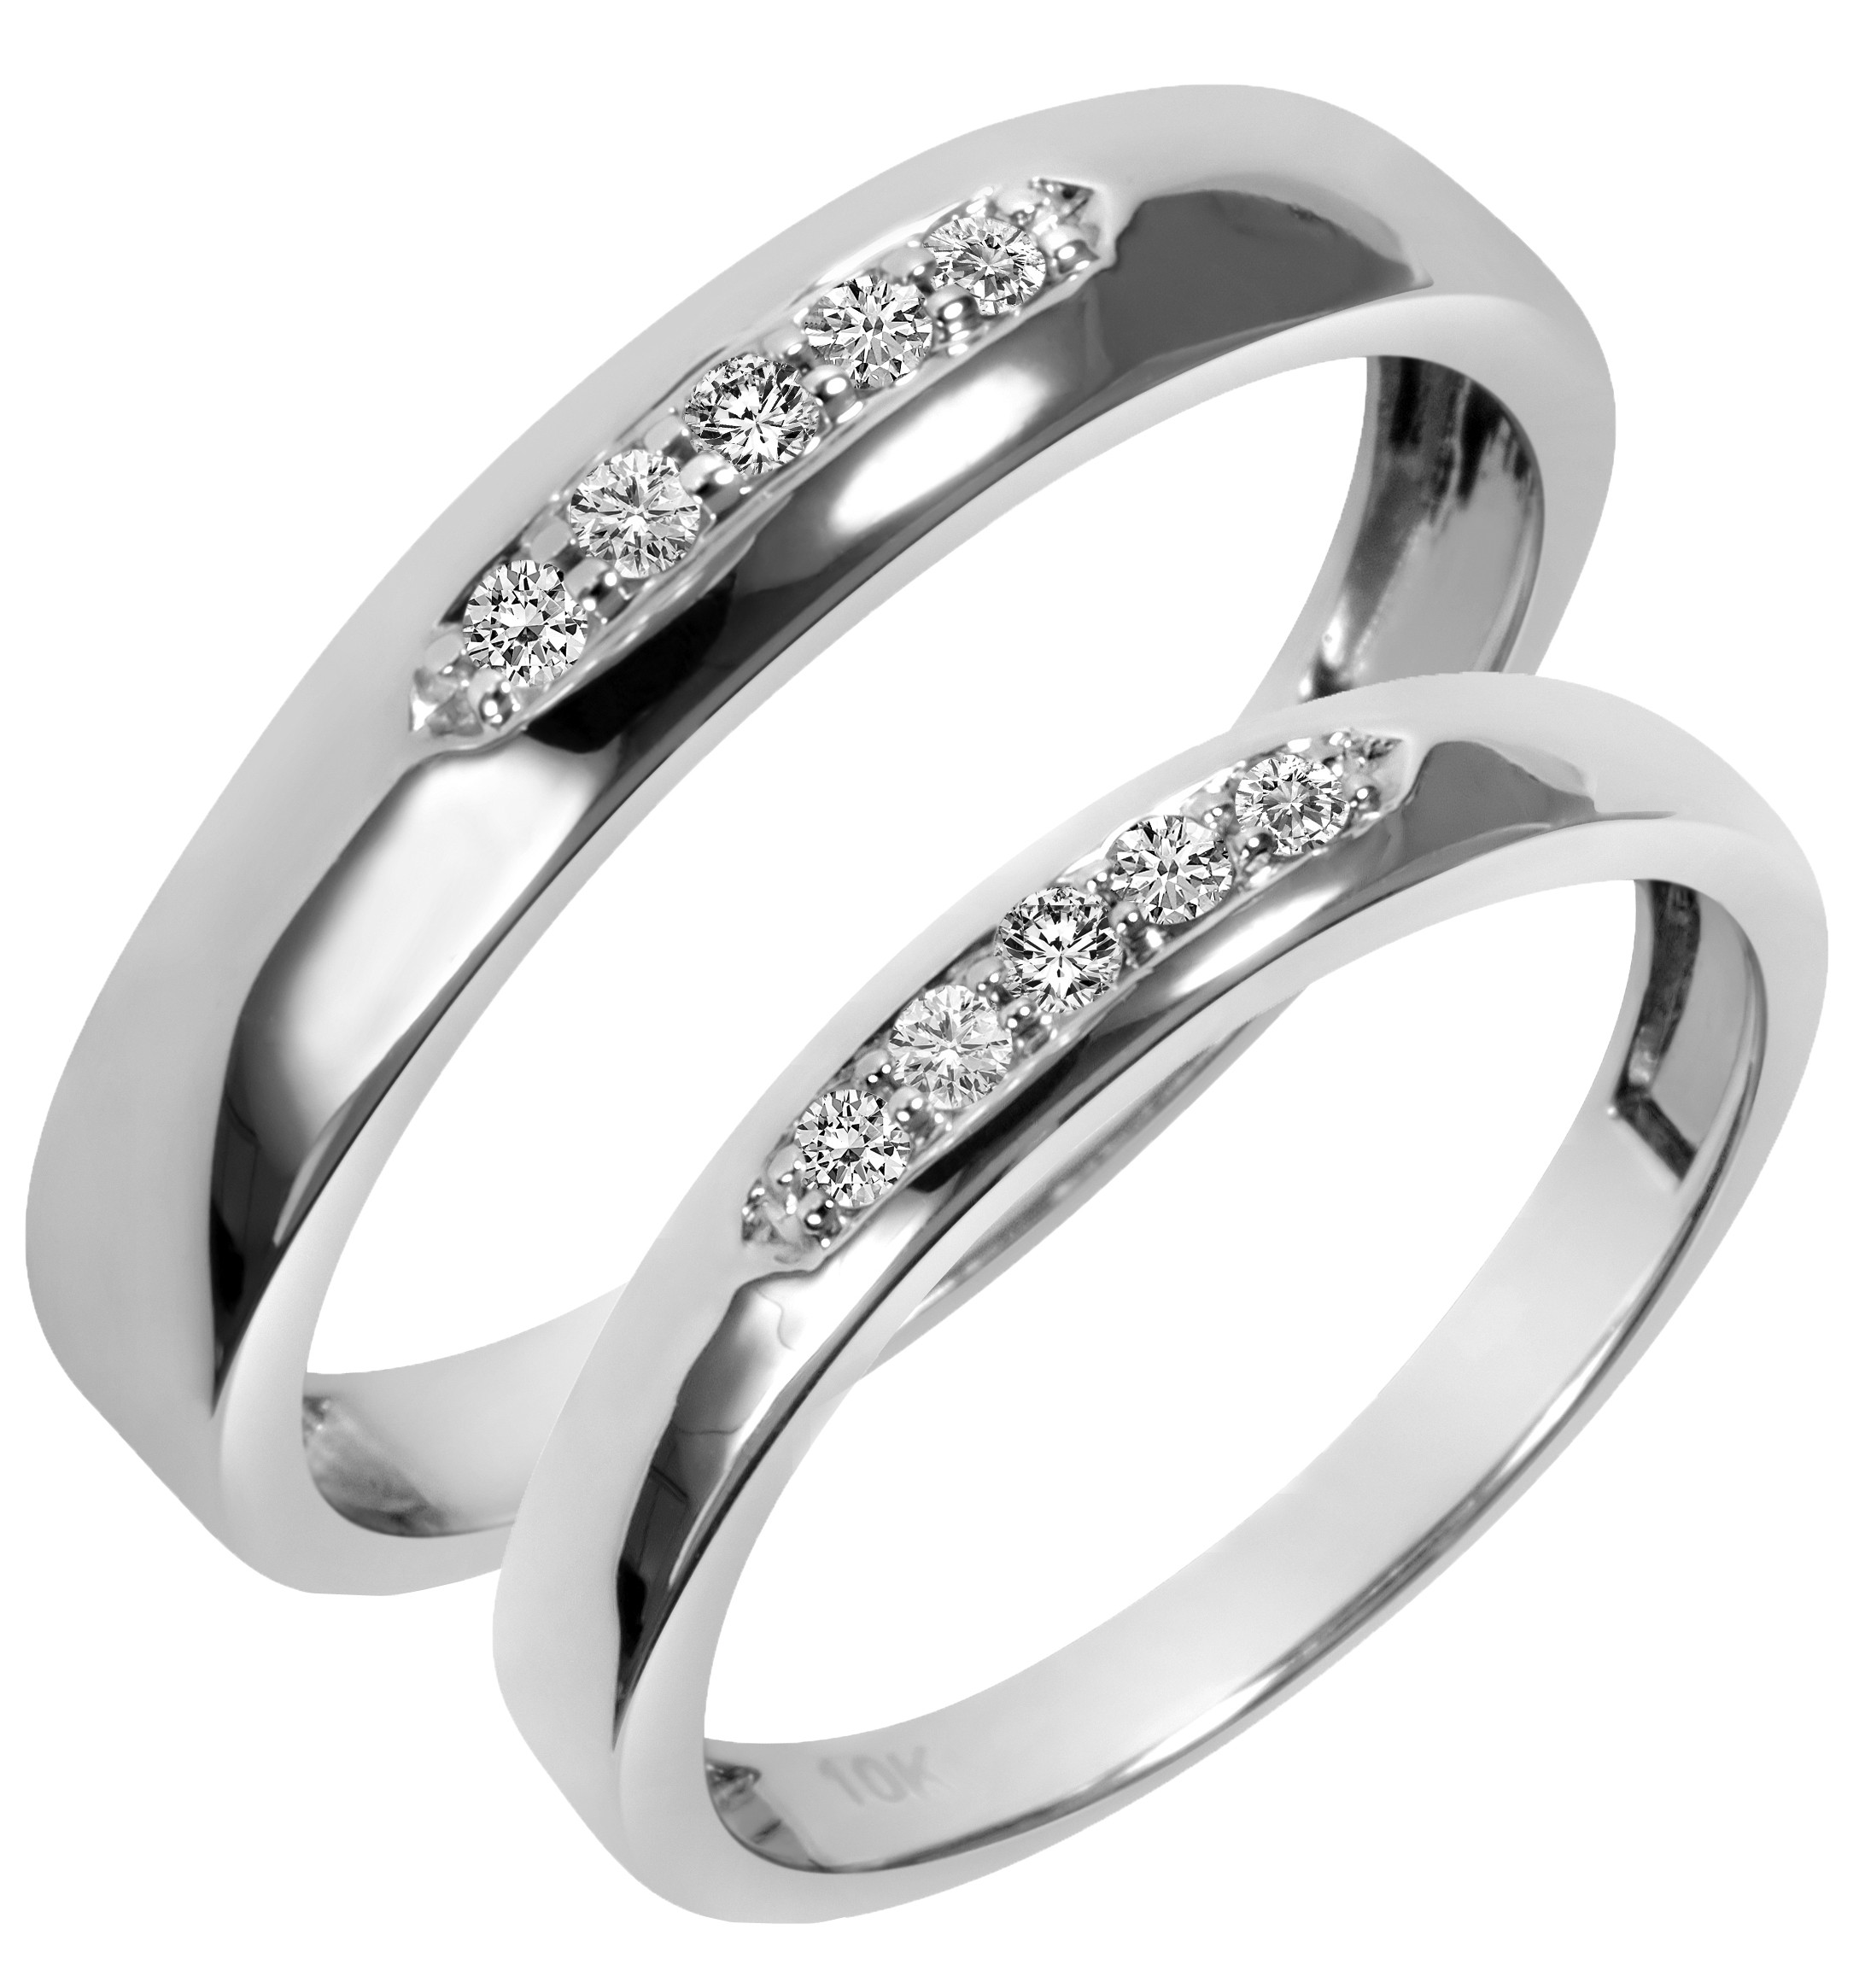 White Gold Wedding Bands Sets
 White Gold Wedding Ring Sets His And Hers